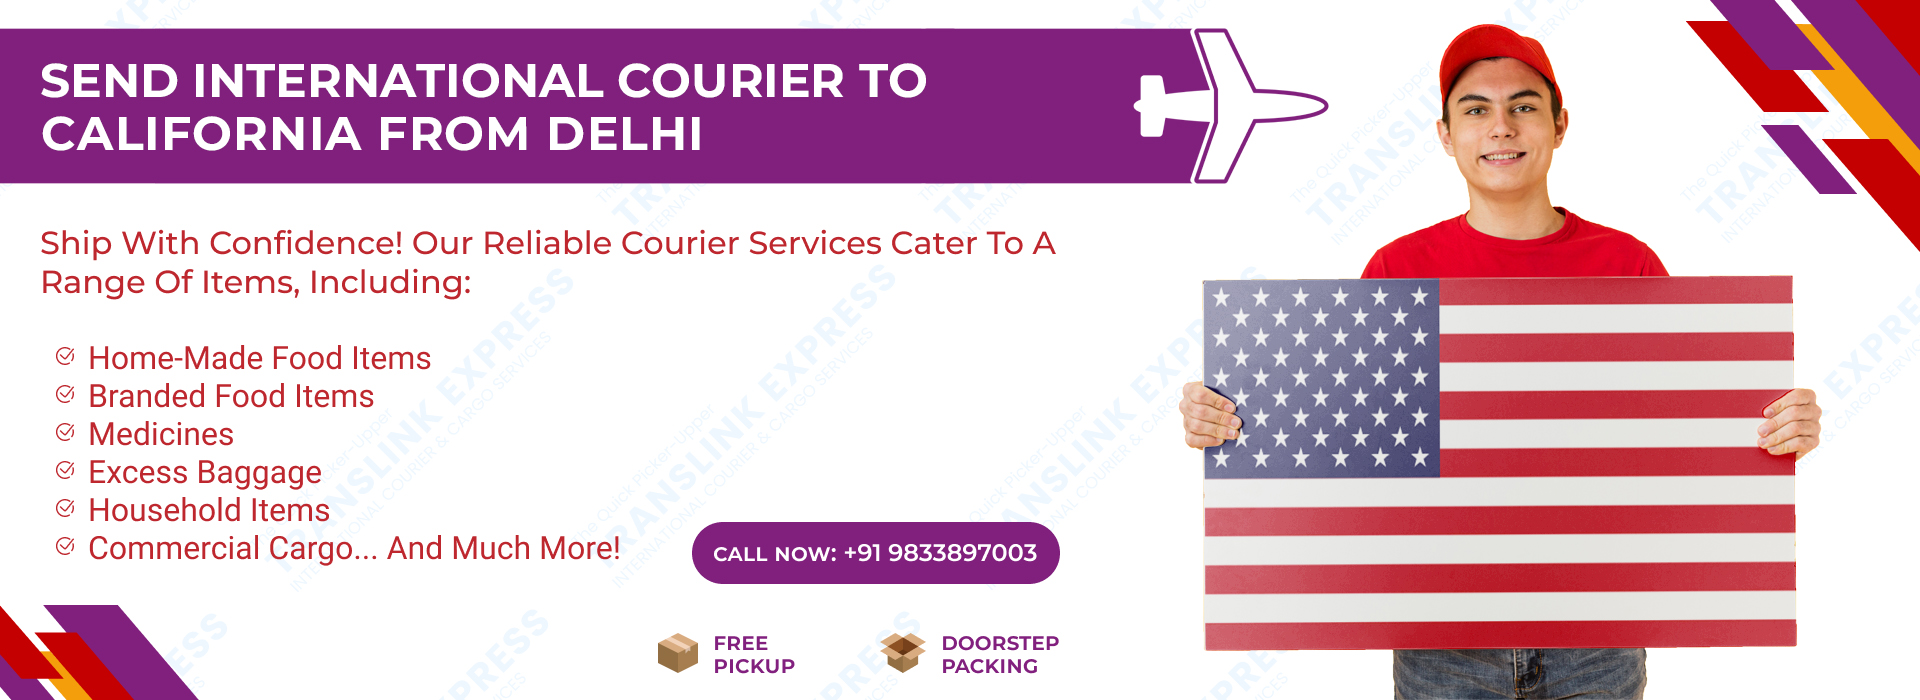 Courier to California From Delhi